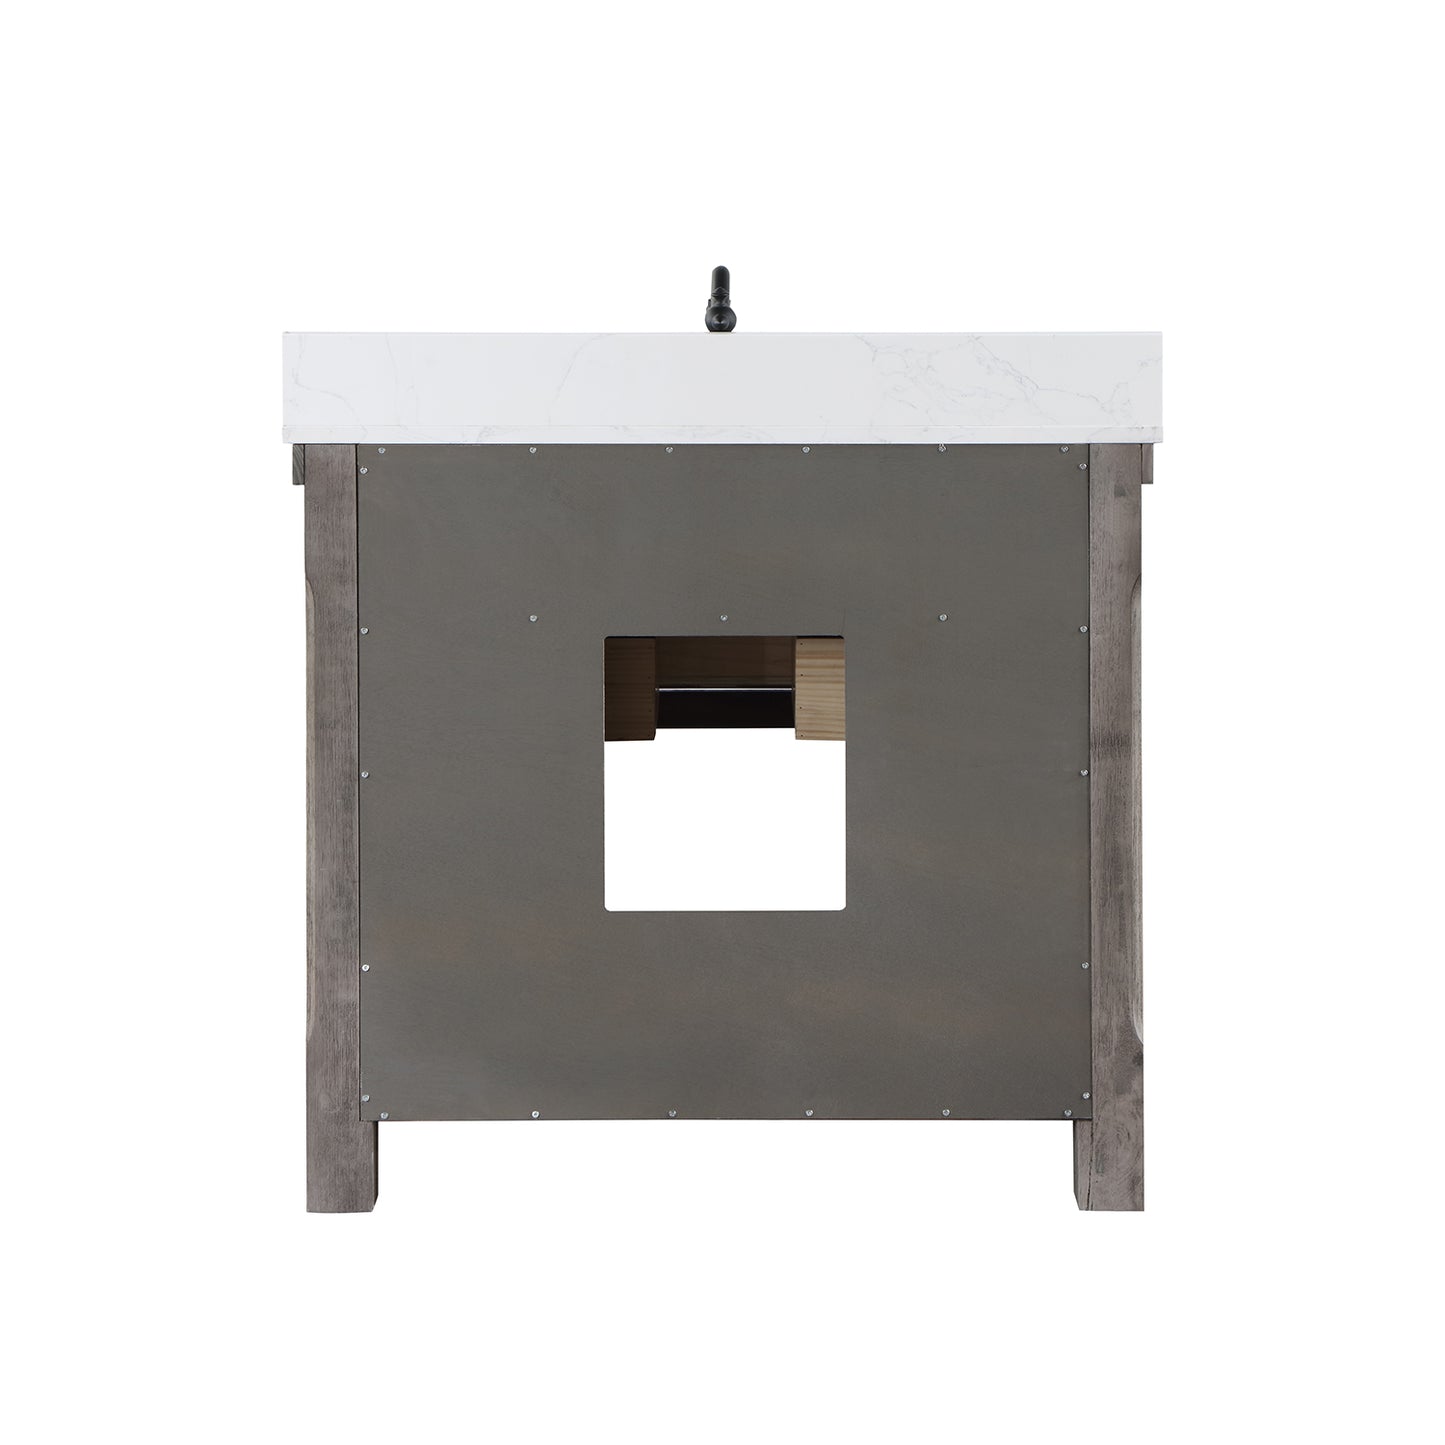 Villareal 36" Single Bath Vanity in Classical Grey with Composite Stone Top in White, White Farmhouse Basin